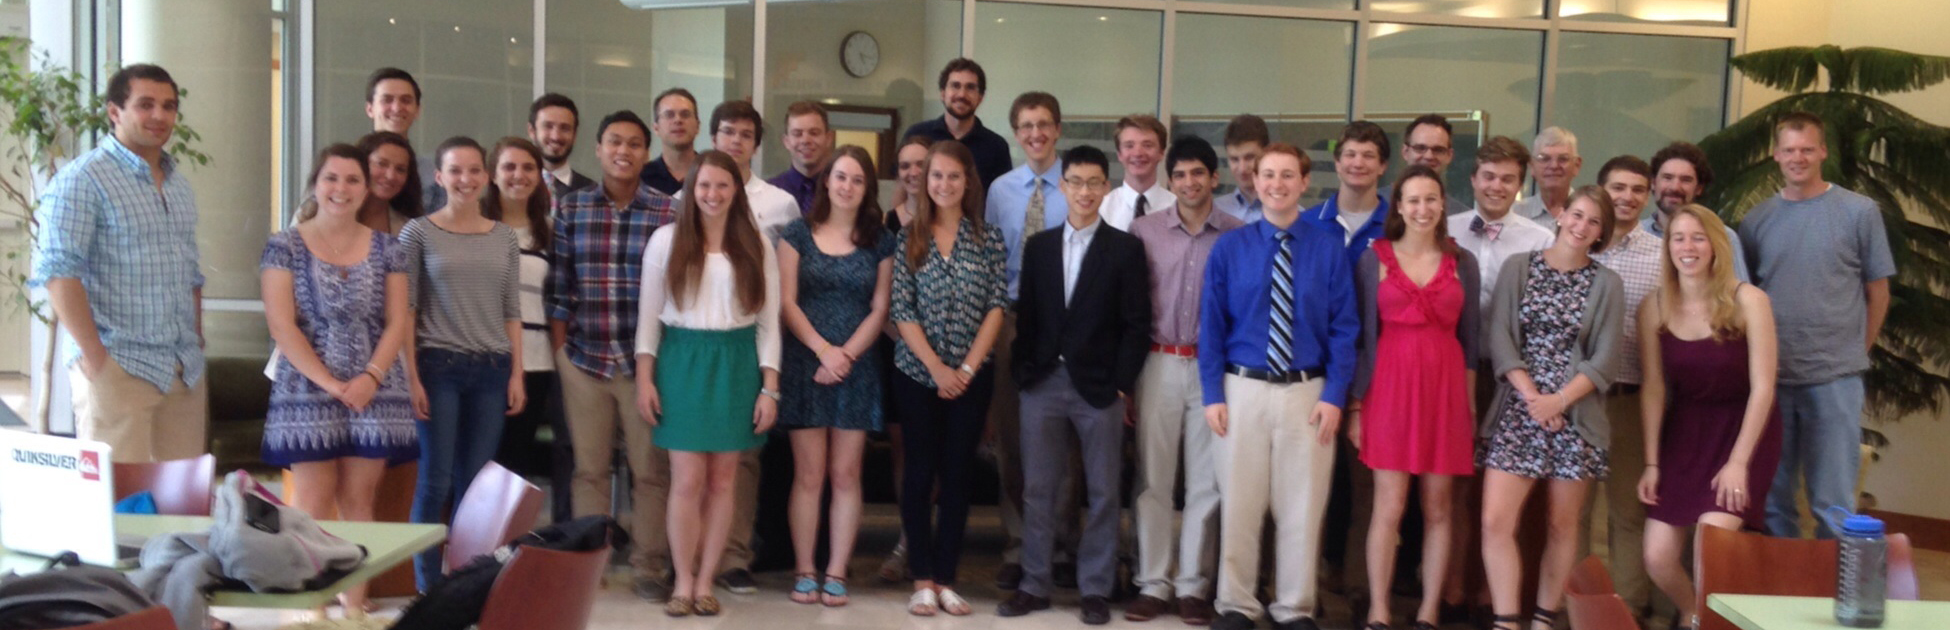 Participants in the 2014 Summer Organic Research Symposium at Colgate University.